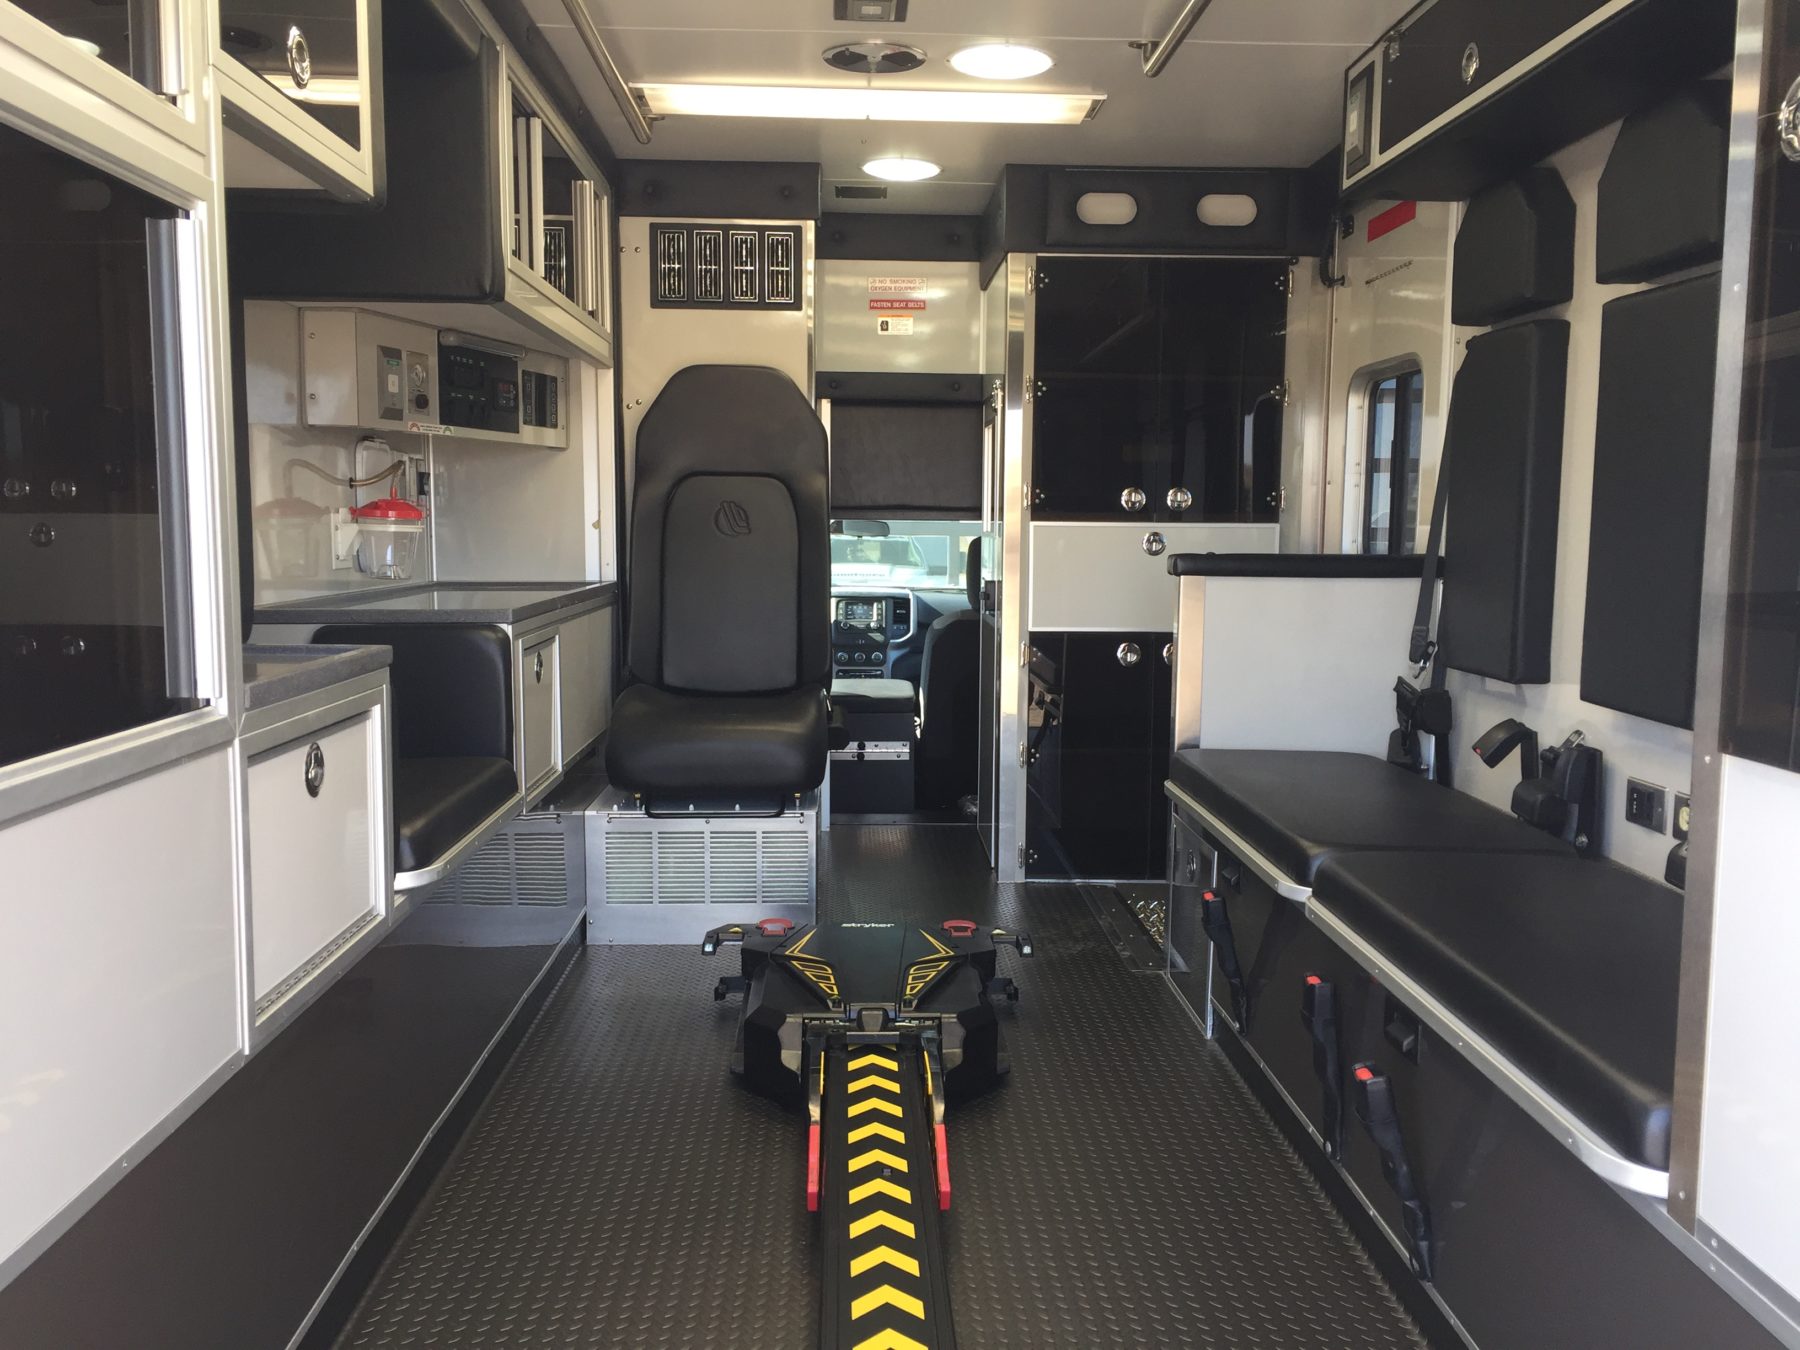 2019 Ram 4500 4x4 Heavy Duty Ambulance For Sale – Picture 2